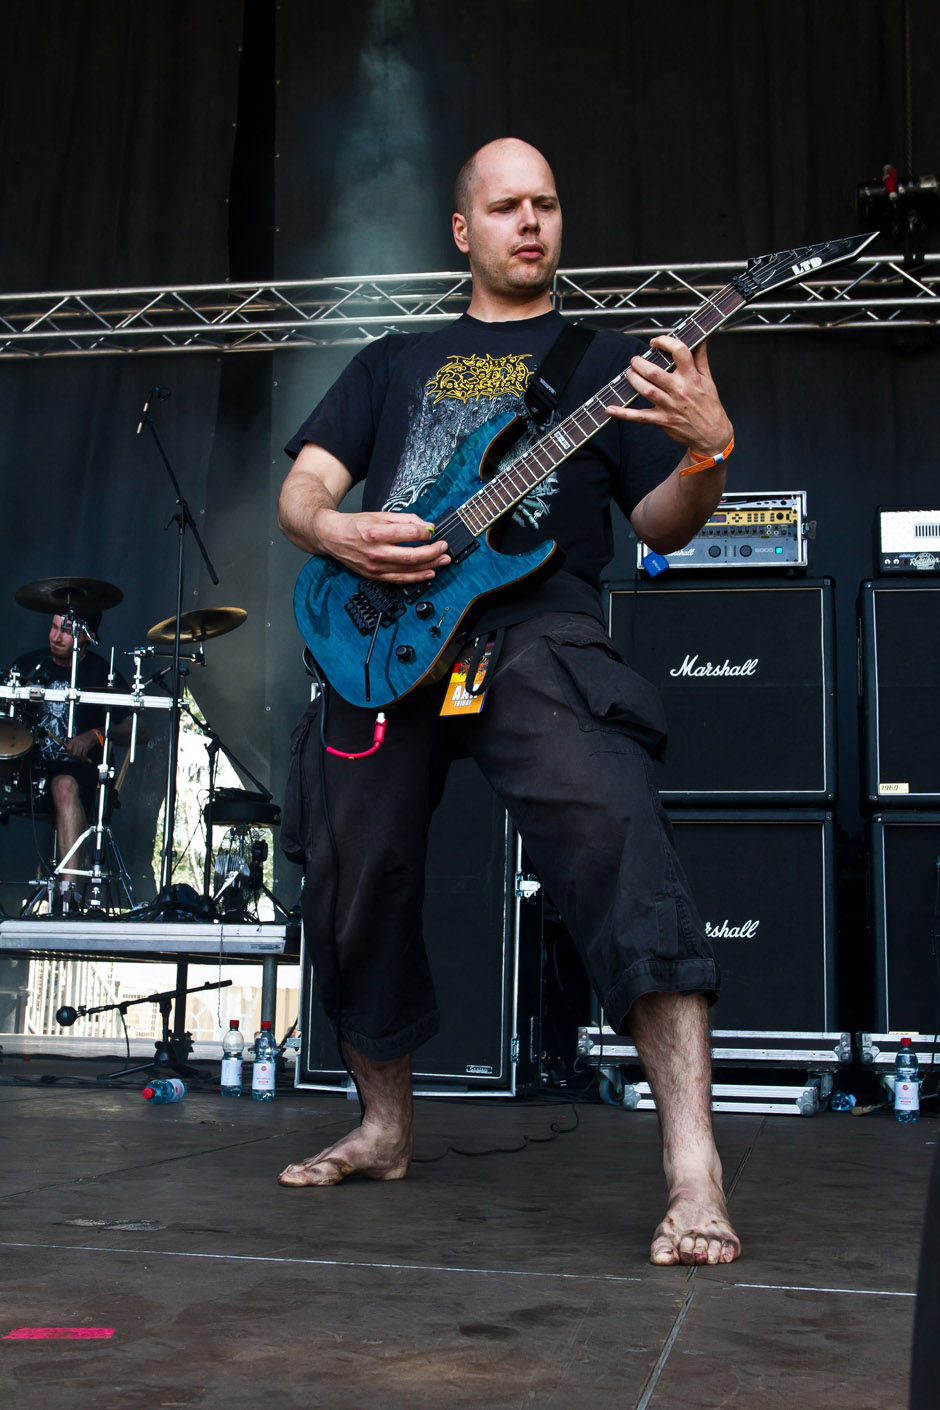 Disavowed live, Extremefest 2012 in Hünxe